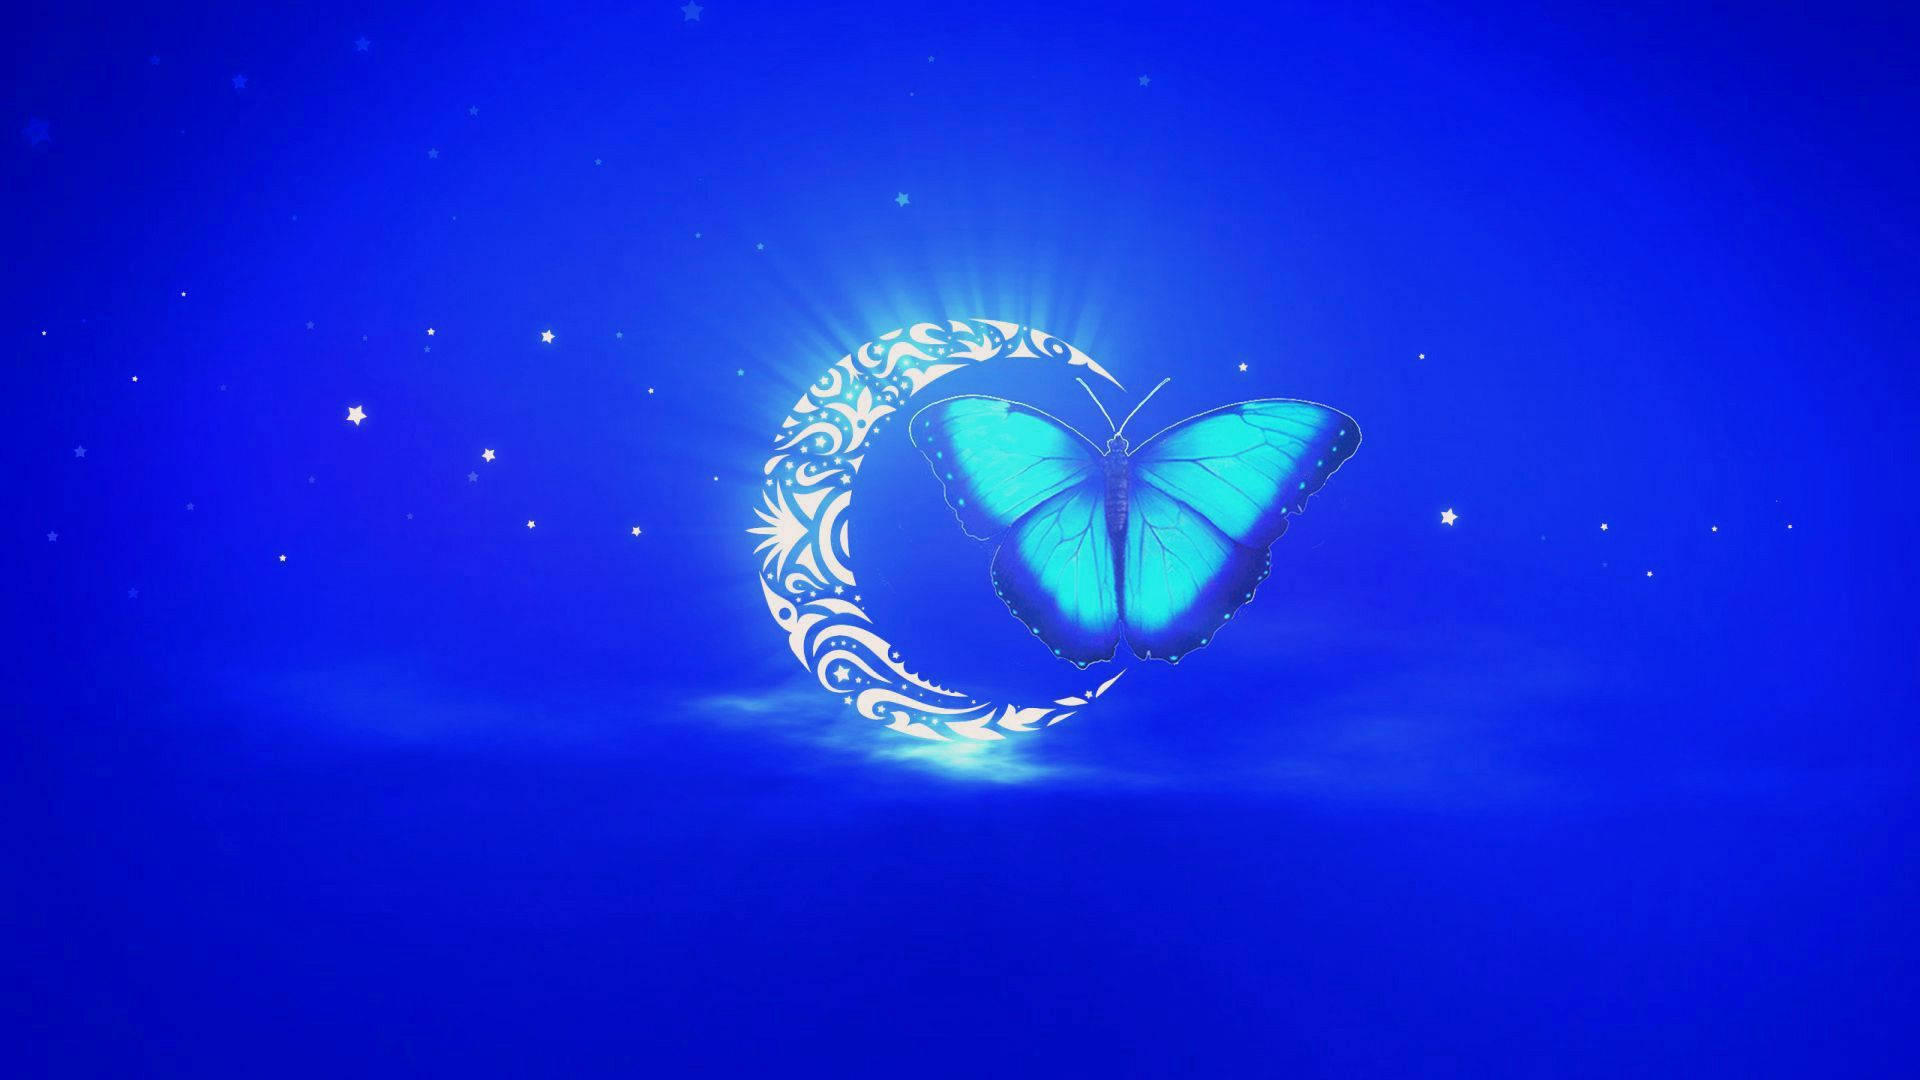 Top 999+ Night Butterfly Wallpaper Full HD, 4K Free to Use